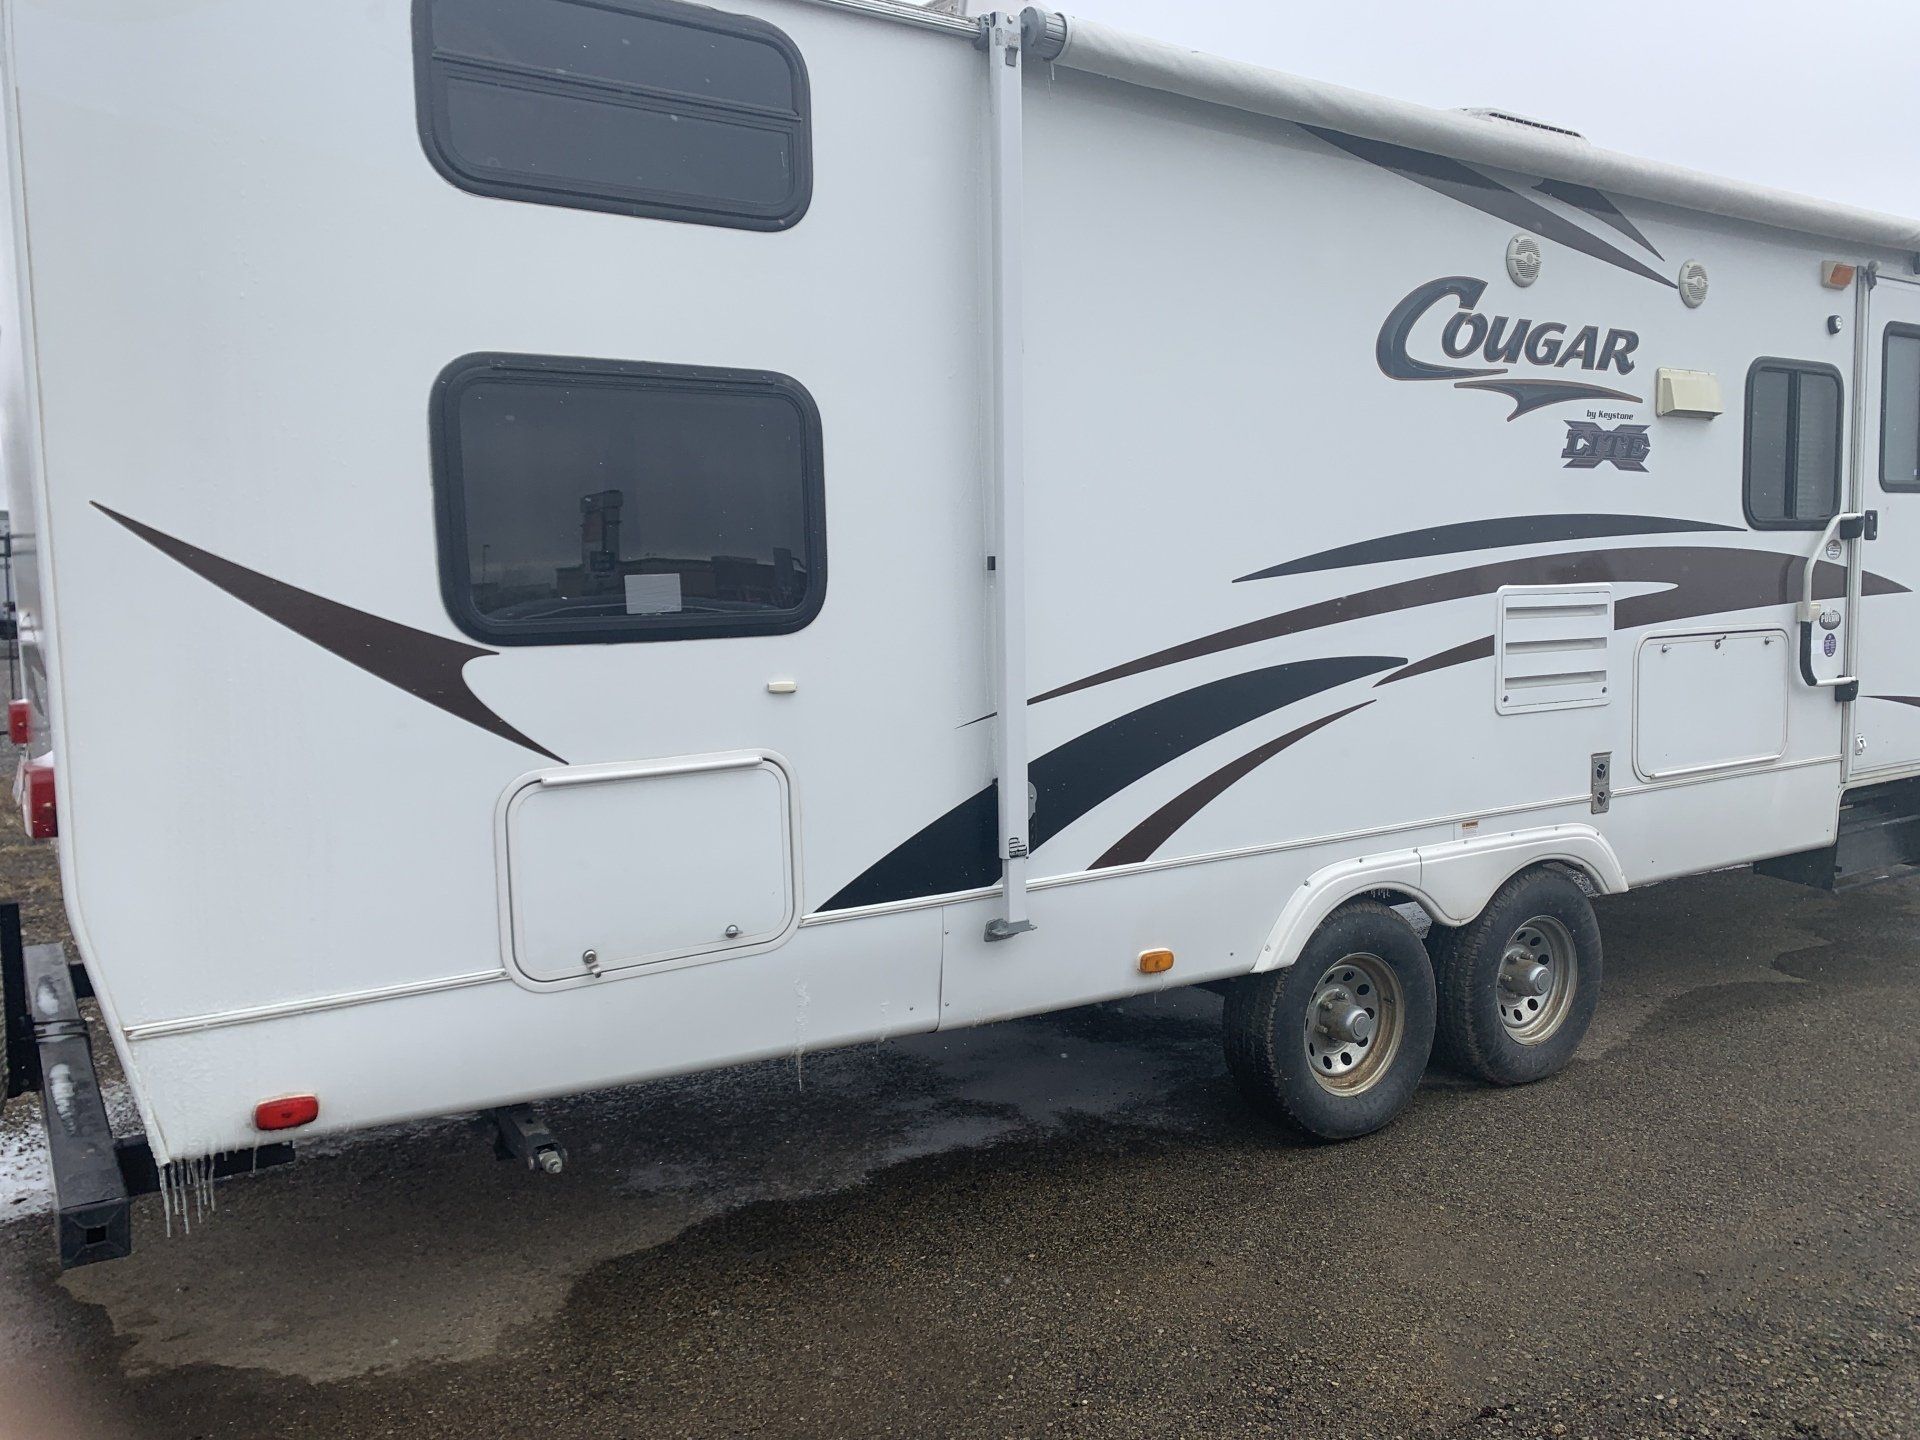 2020 - Alberta's Worst RV Decal Contest - Grand Prize Winner - Before & After - Pic 2